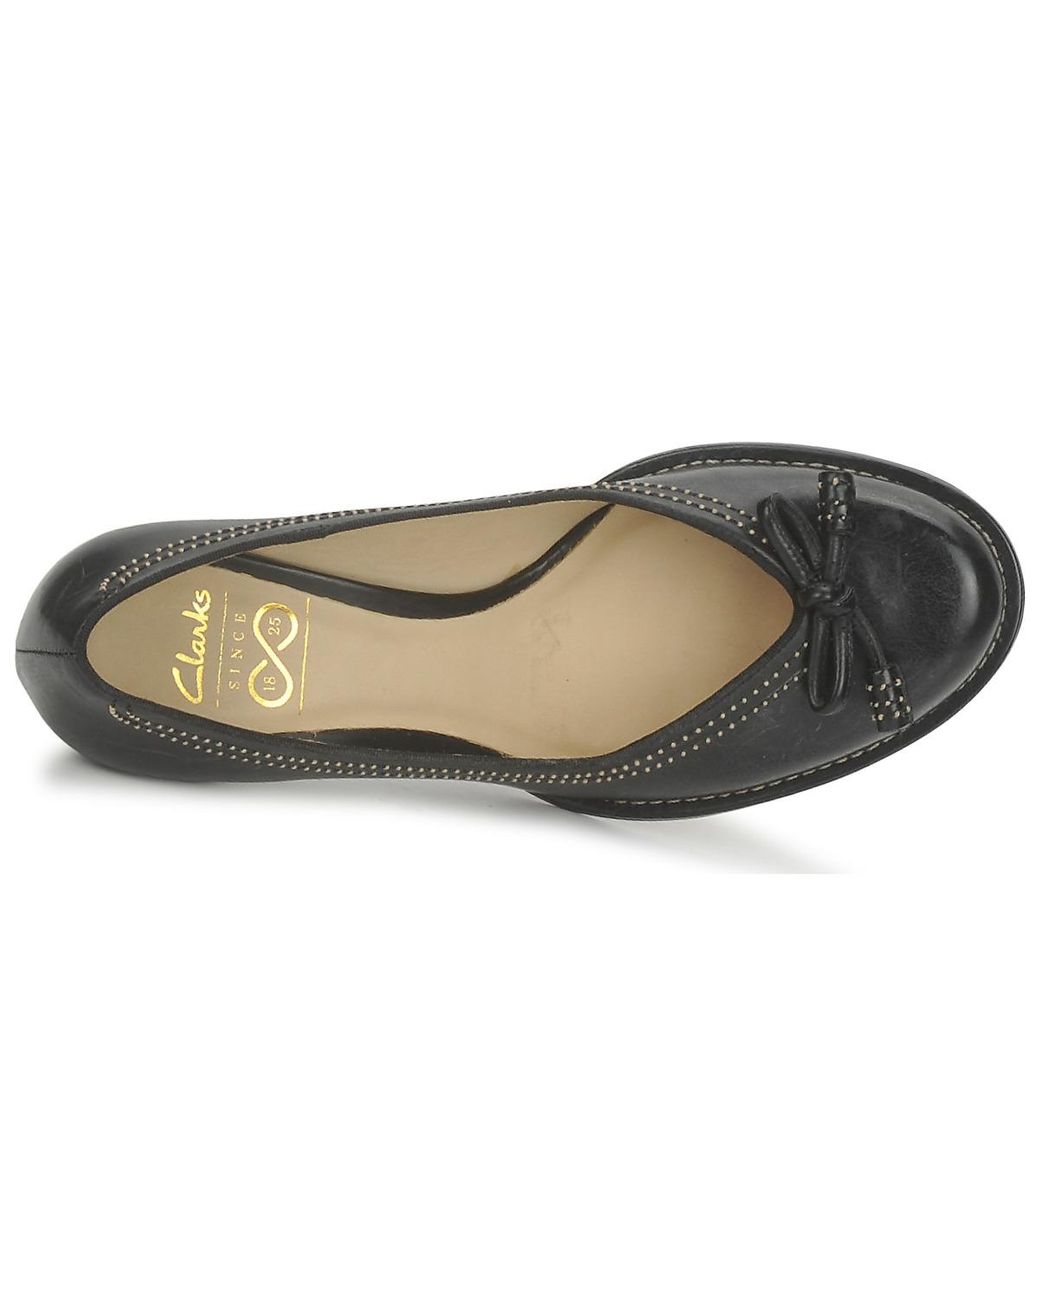 Clarks Leather Bombay Lights Women's Court Shoes In Black | Lyst UK